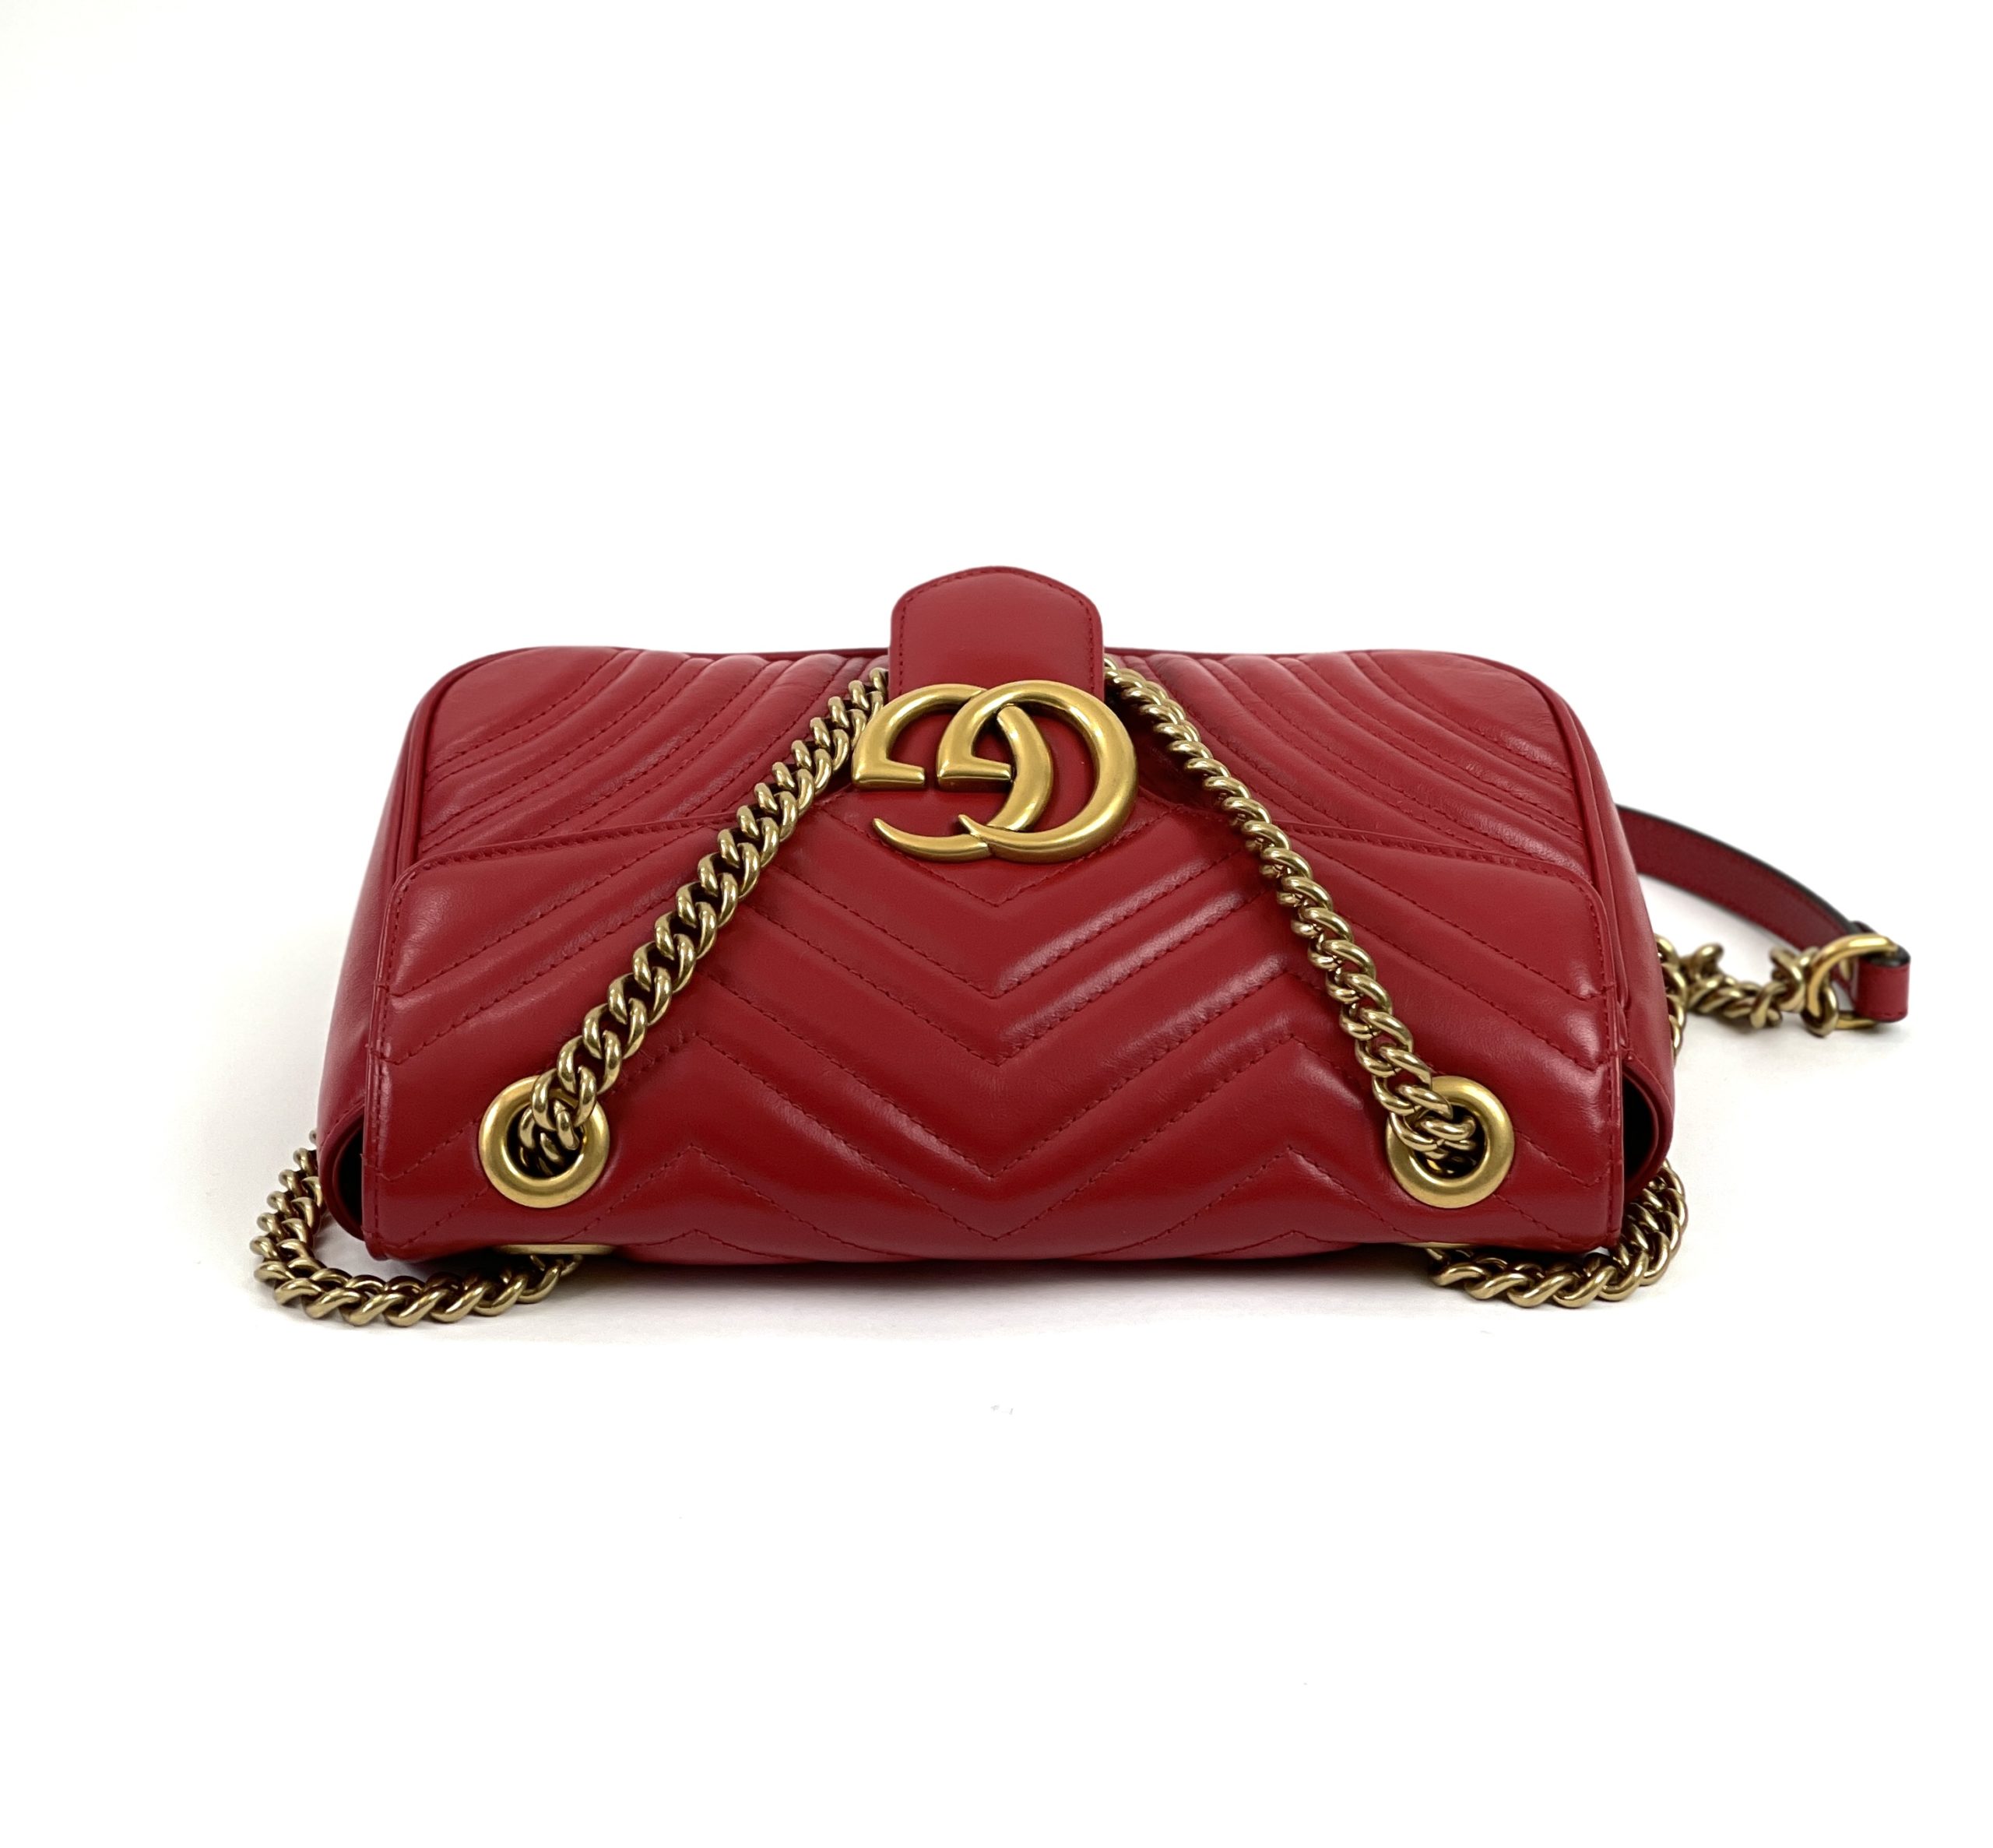 GUCCI GG Marmont Small Shoulder Bag Red